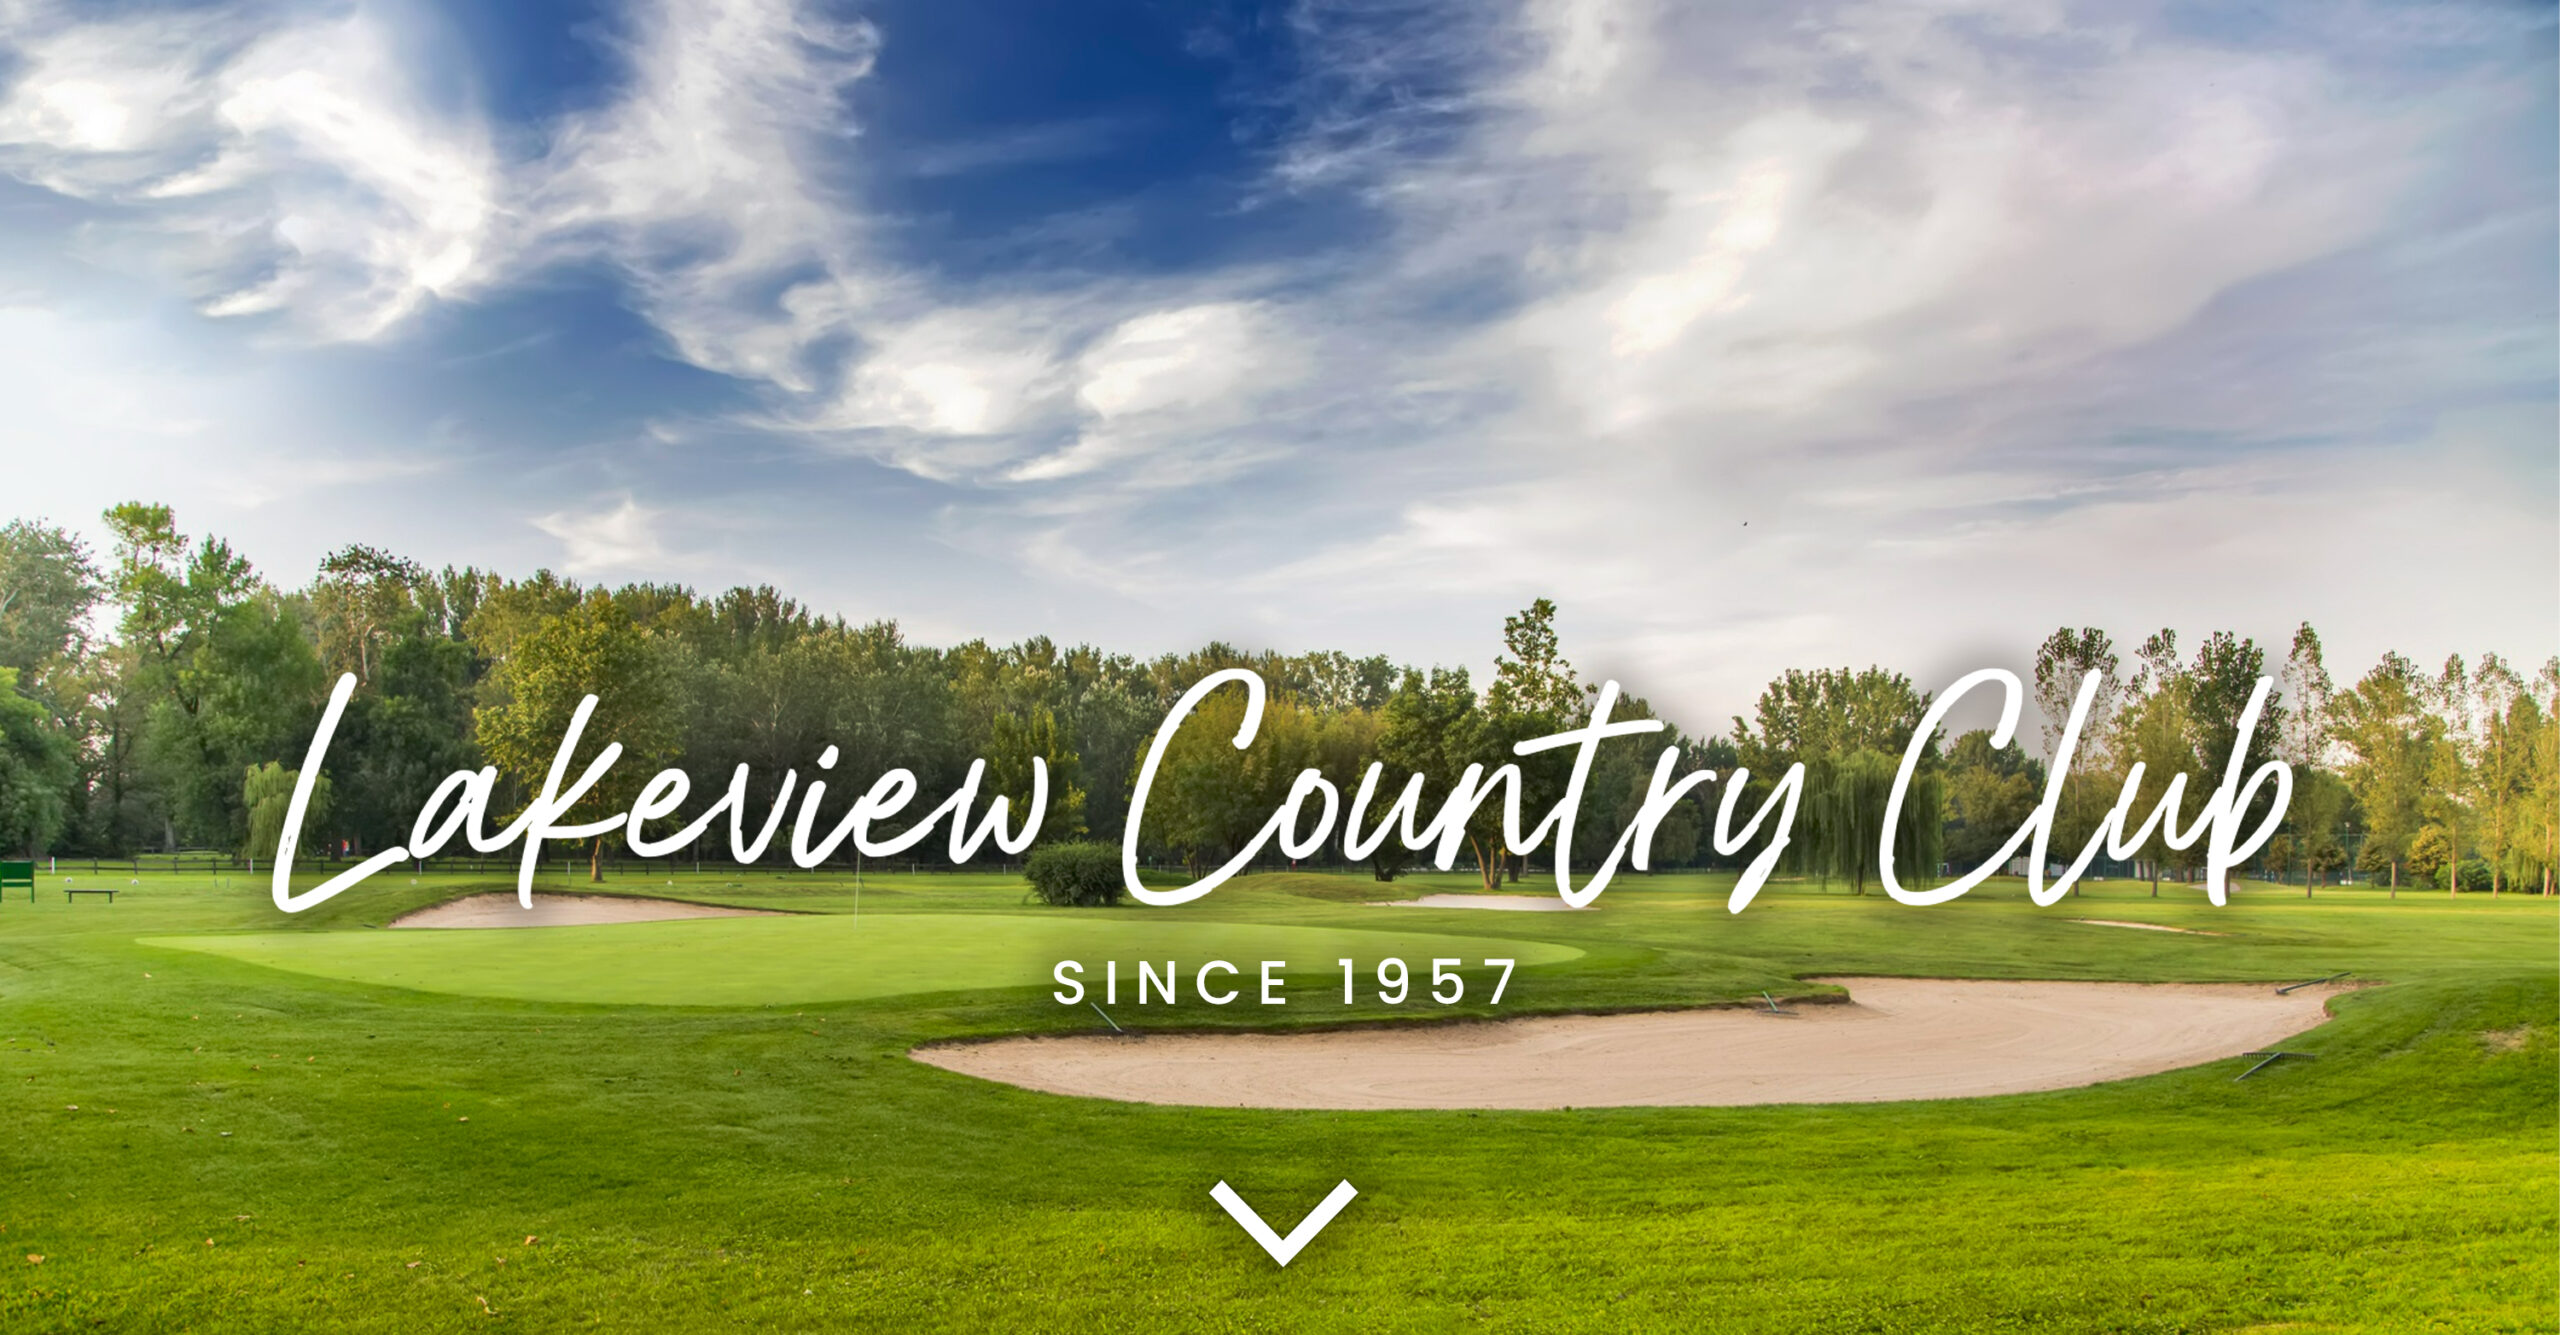 Lakeview Country Club